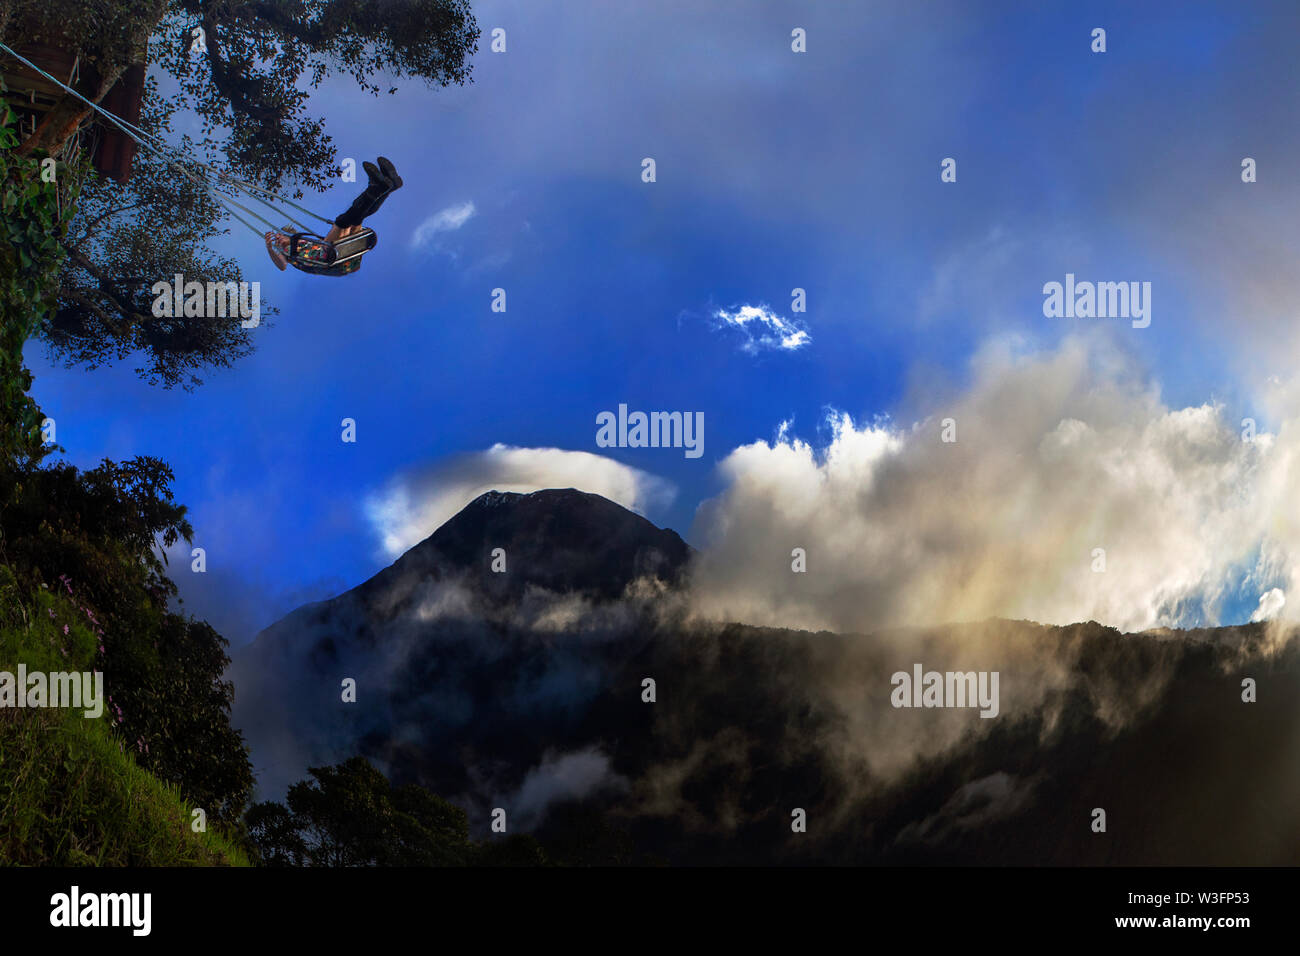 A girl enjoying on swing at the End of the World agains view of Tungurahua Volcano in beautiful Sunset Explosion Stock Photo